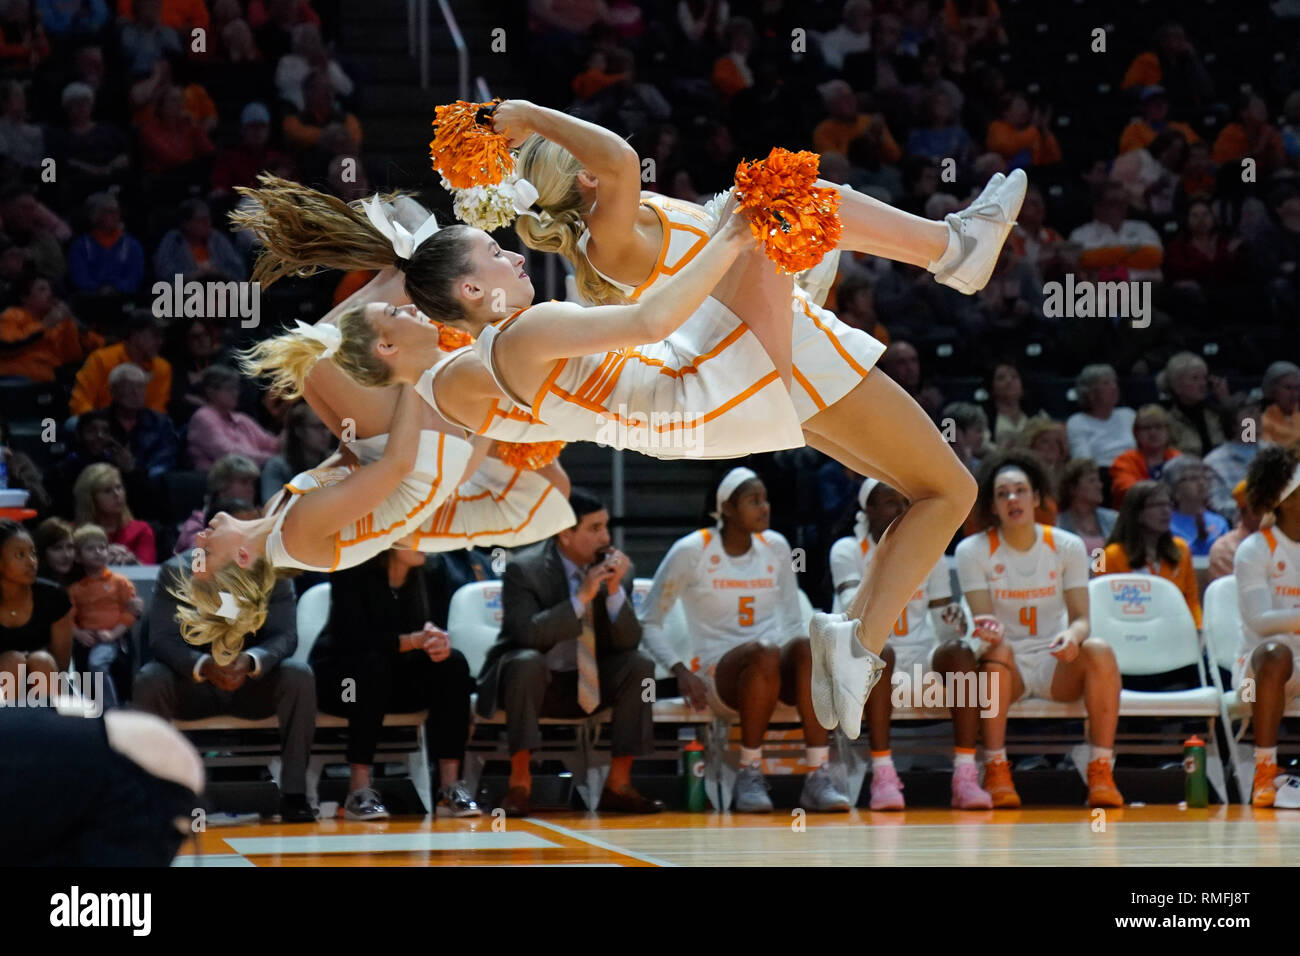 February 14, 2019: Tennessee Lady Volunteers cheerleaders perform during the NCAA basketball game between the University of Tennessee Lady Volunteers and the Auburn University Tigers at Thompson Boling Arena in Knoxville TN Tim Gangloff/CSM Stock Photo